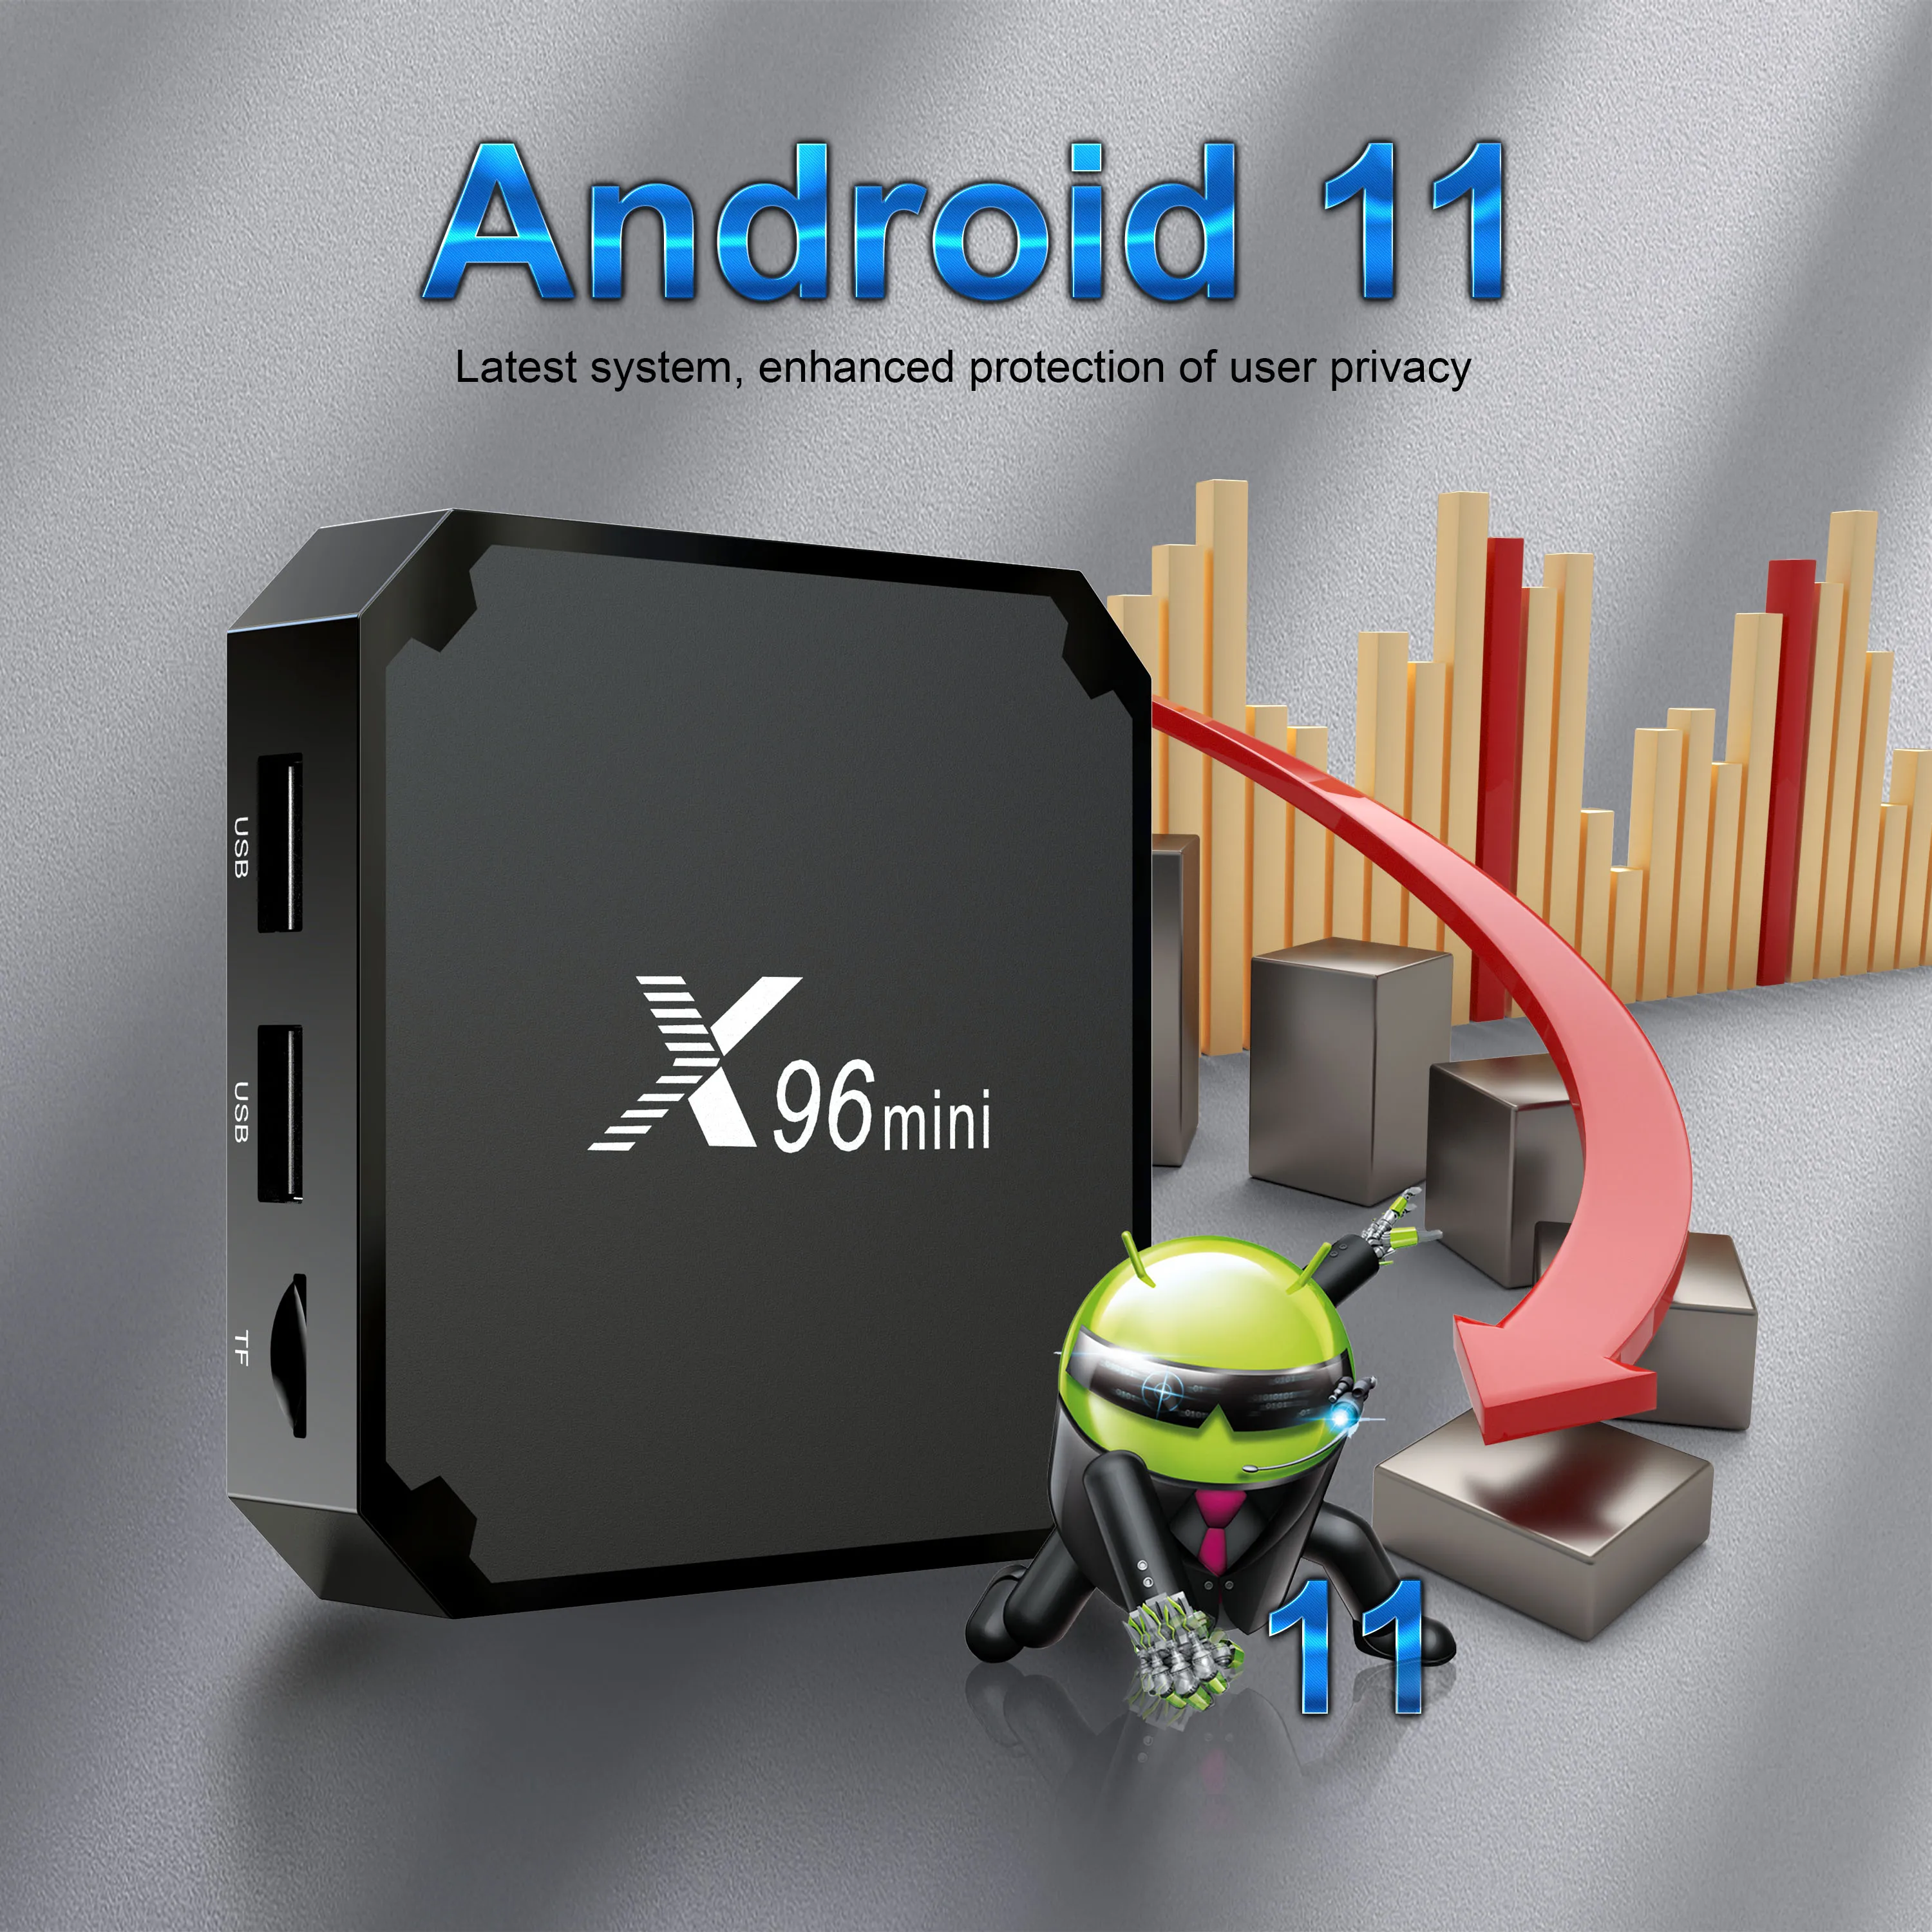 X96 Mini Android 11.0 X96 Mini Android Box With Amlogic S905W2, 2GB RAM,  16GB Storage, Dual WiFi, And Media Player Outperforms TX6 And TX3 From  Flysharkcompany, $19.1